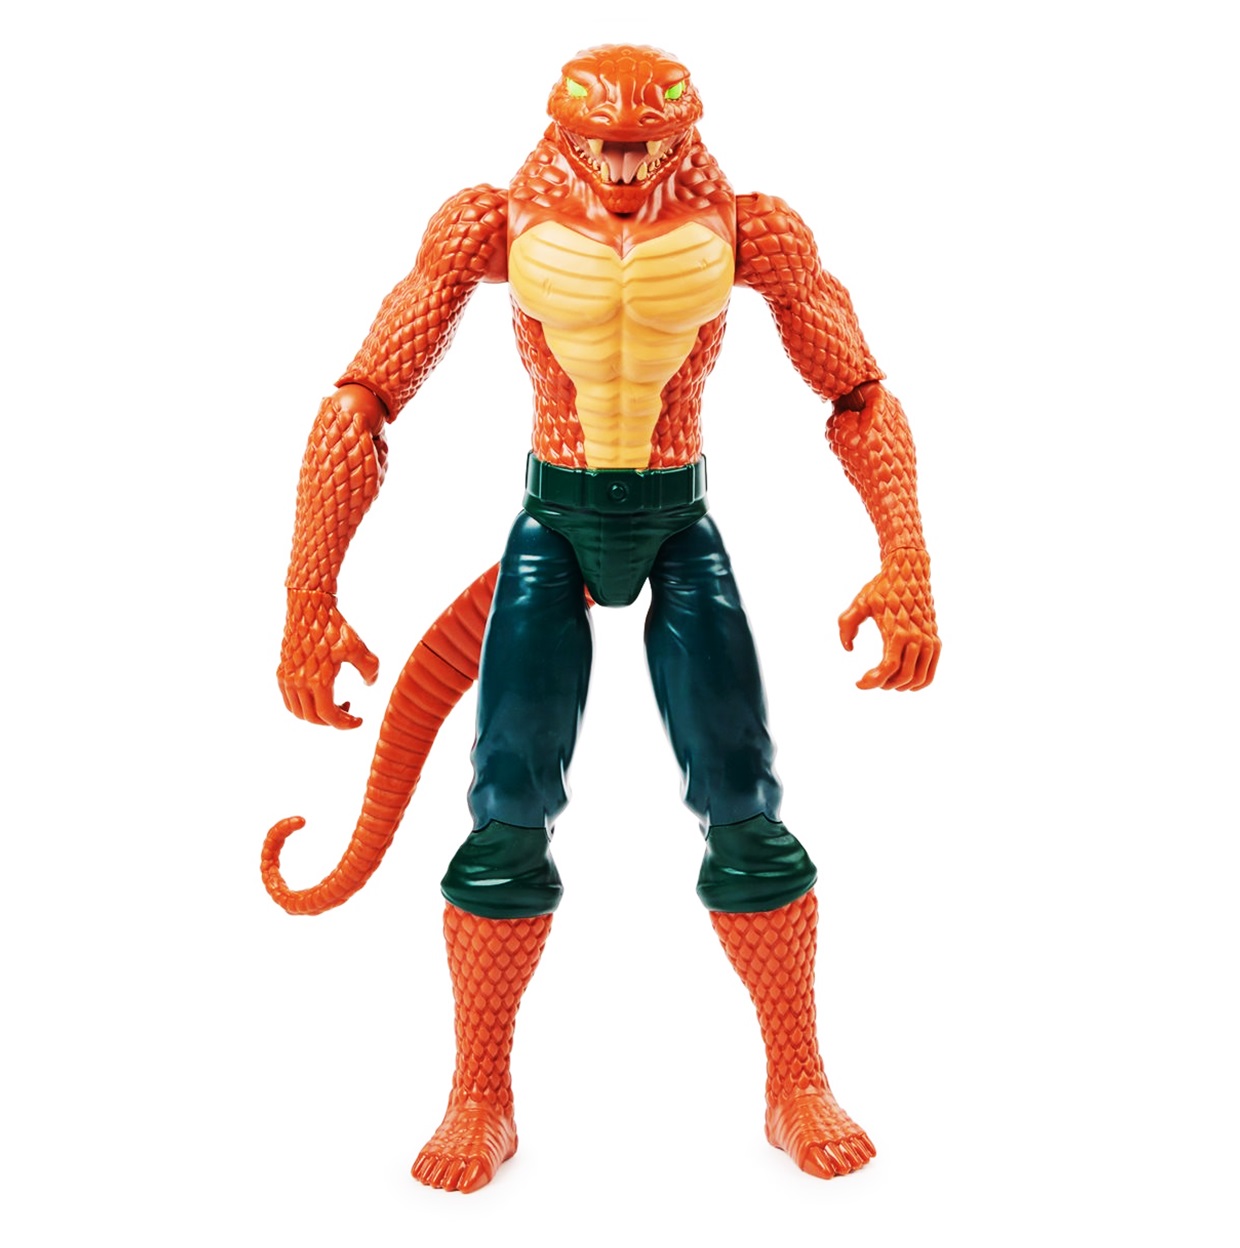 Copperhead 1st Edition Figura The Caped Crusader Spin Master